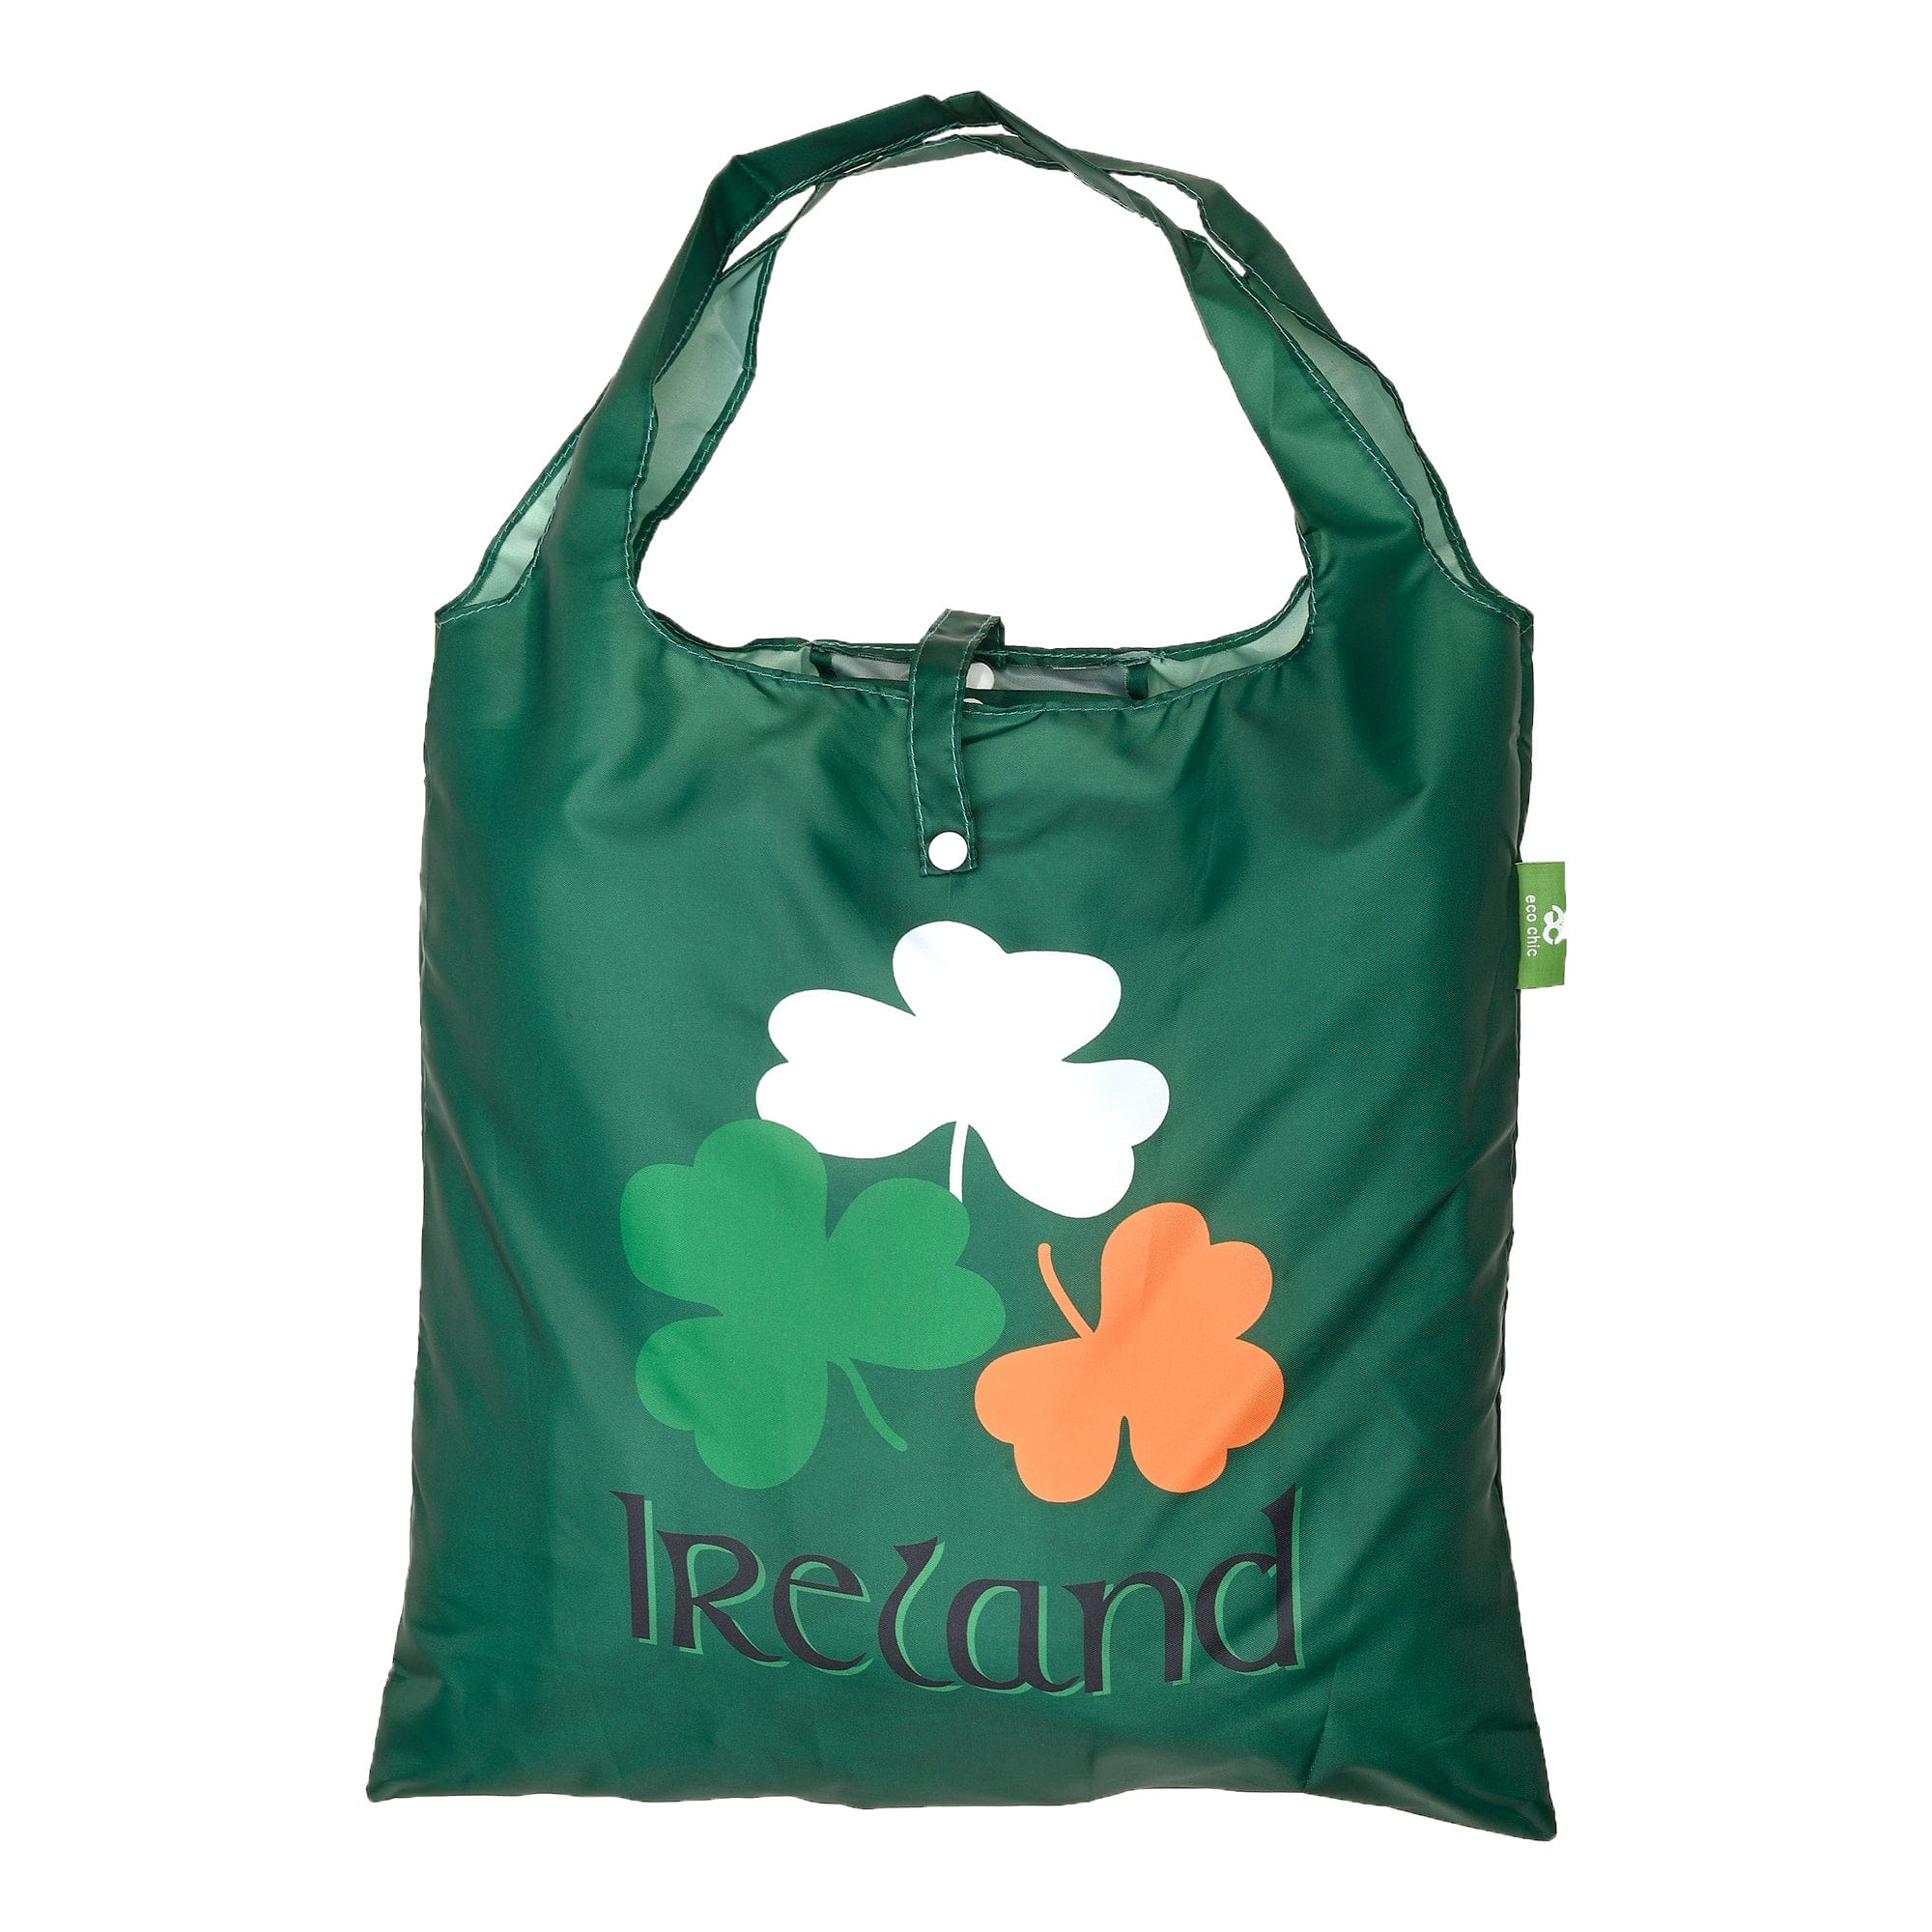 Eco Chic Eco Chic Tourist Collection Shopping Bag - Ireland